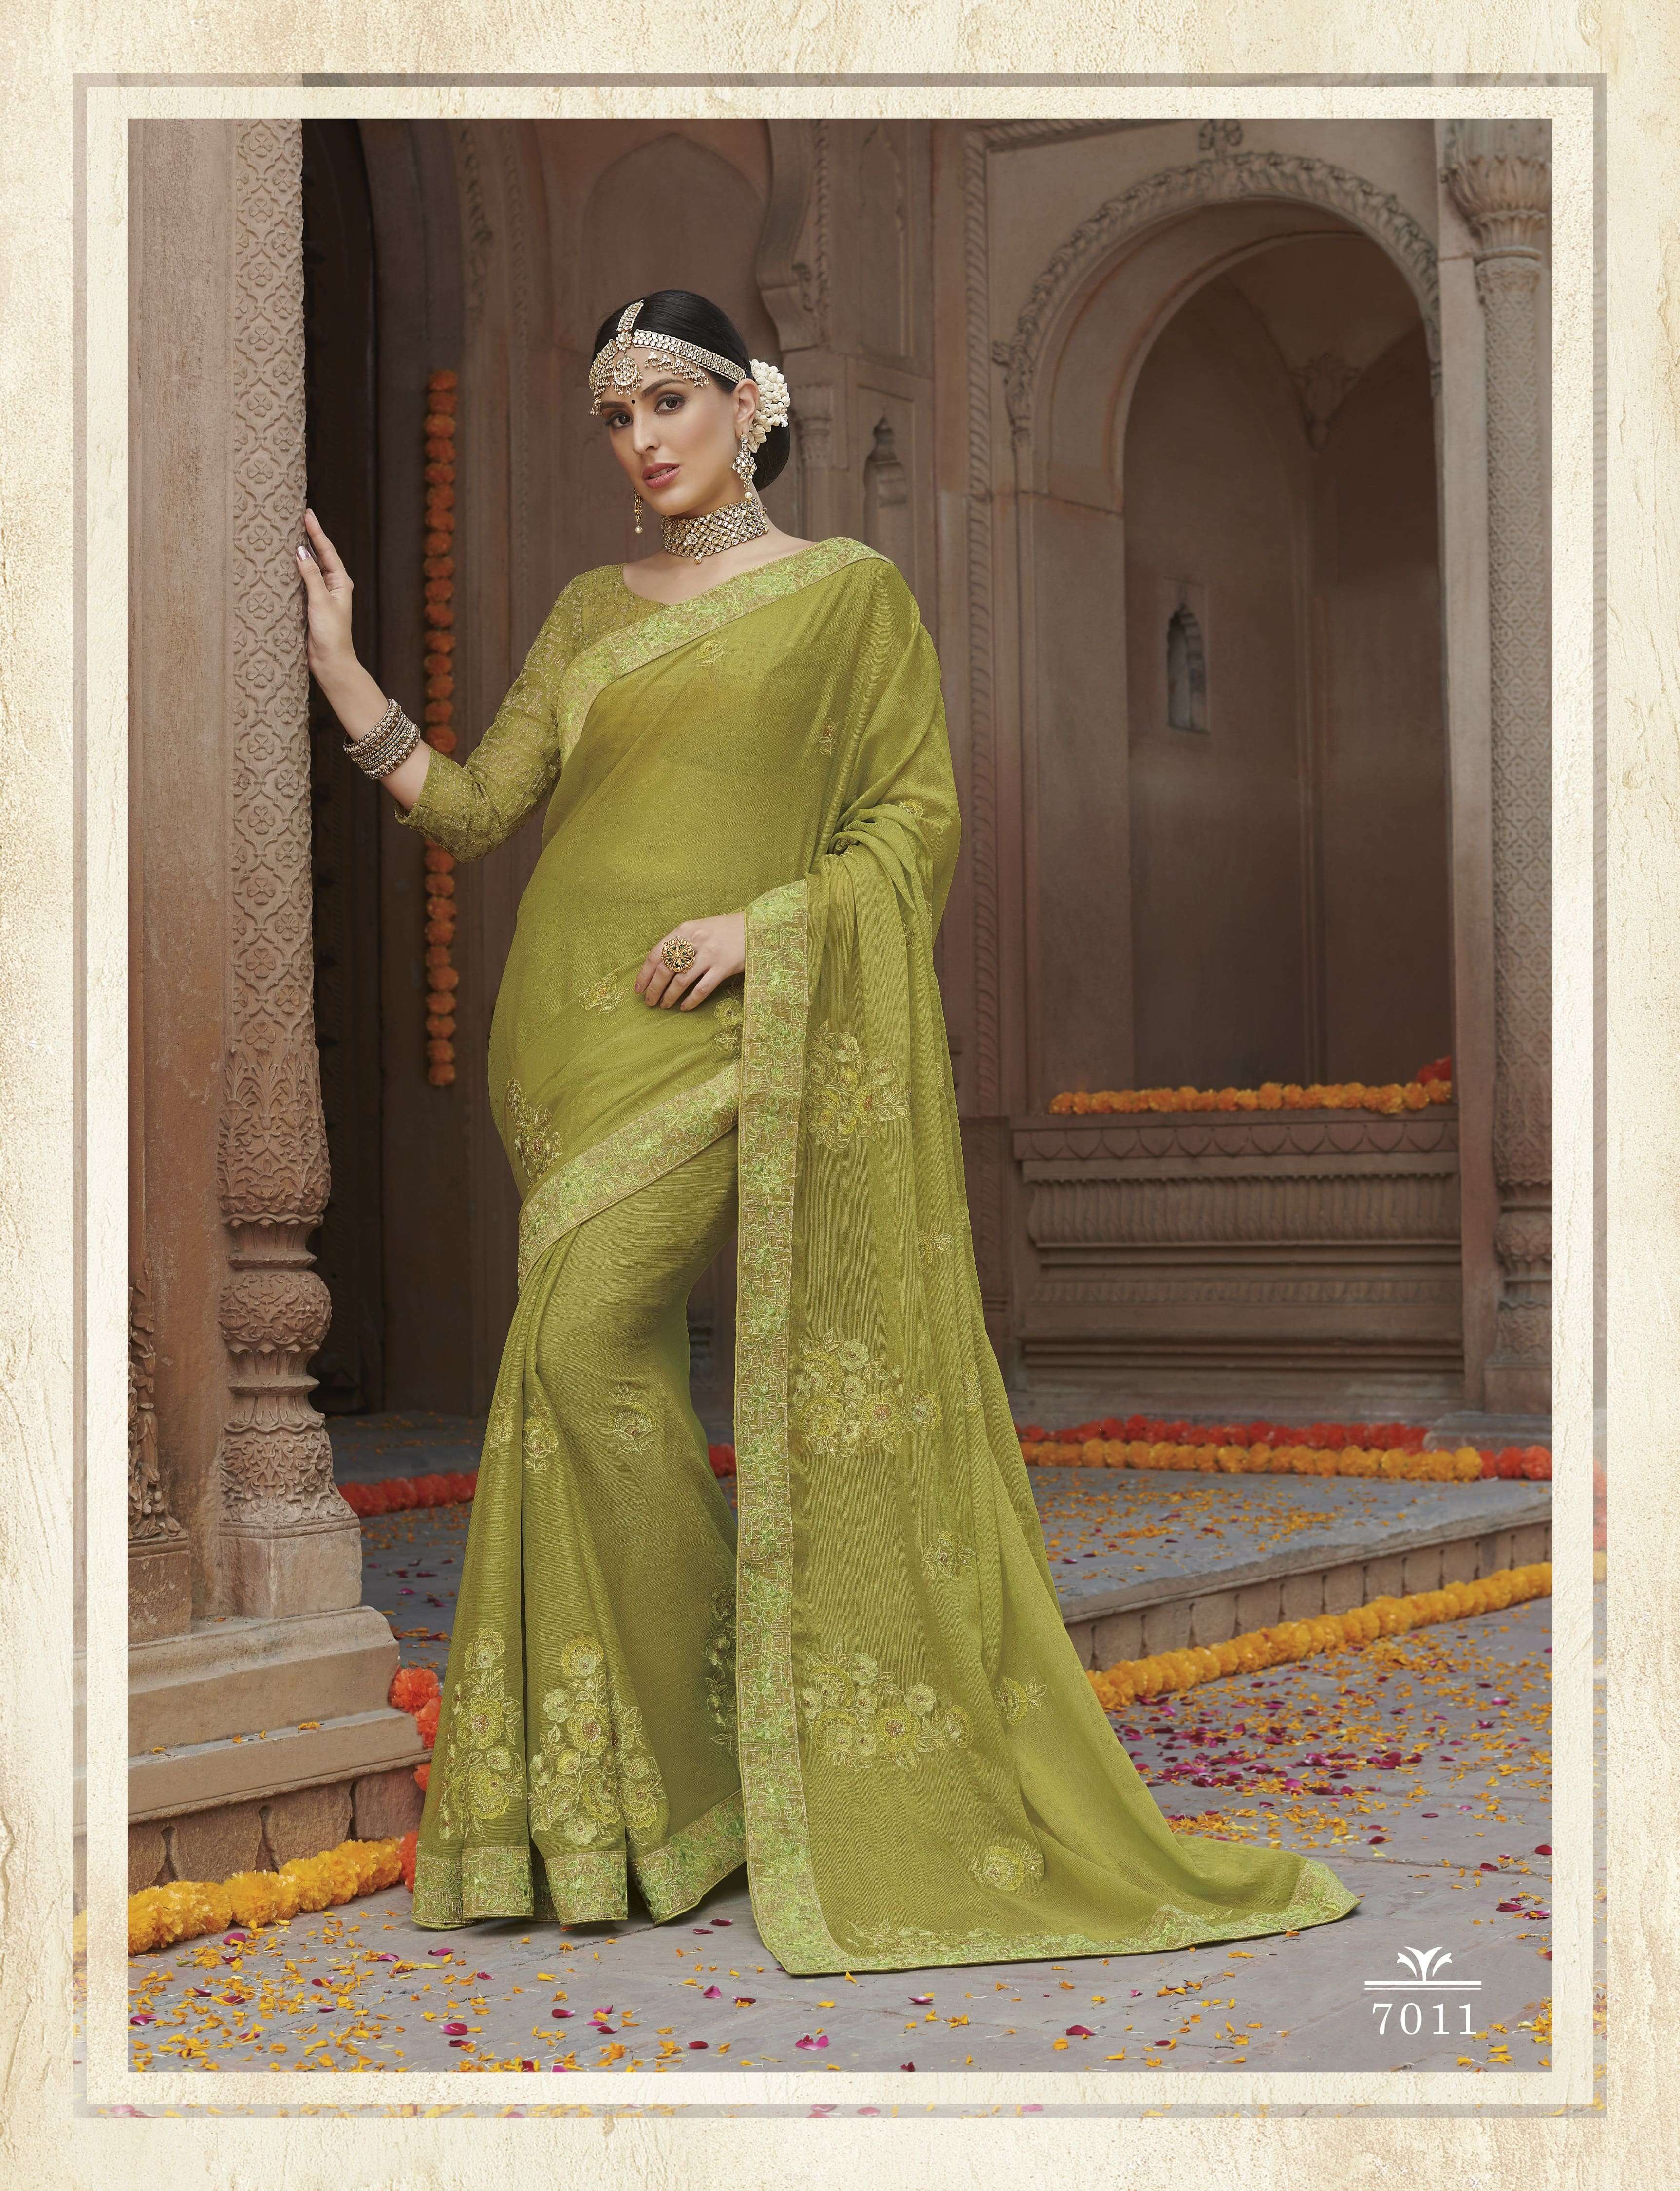 NYASSA VOL-8 BY SUBHASH SAREES 7001 TO 7012 SERIES INDIAN TRADITIONAL WEAR COLLECTION BEAUTIFUL STYLISH FANCY COLORFUL PARTY WEAR & OCCASIONAL WEAR GEORGETTE/CHIFFON/SILK SAREES AT WHOLESALE PRICE